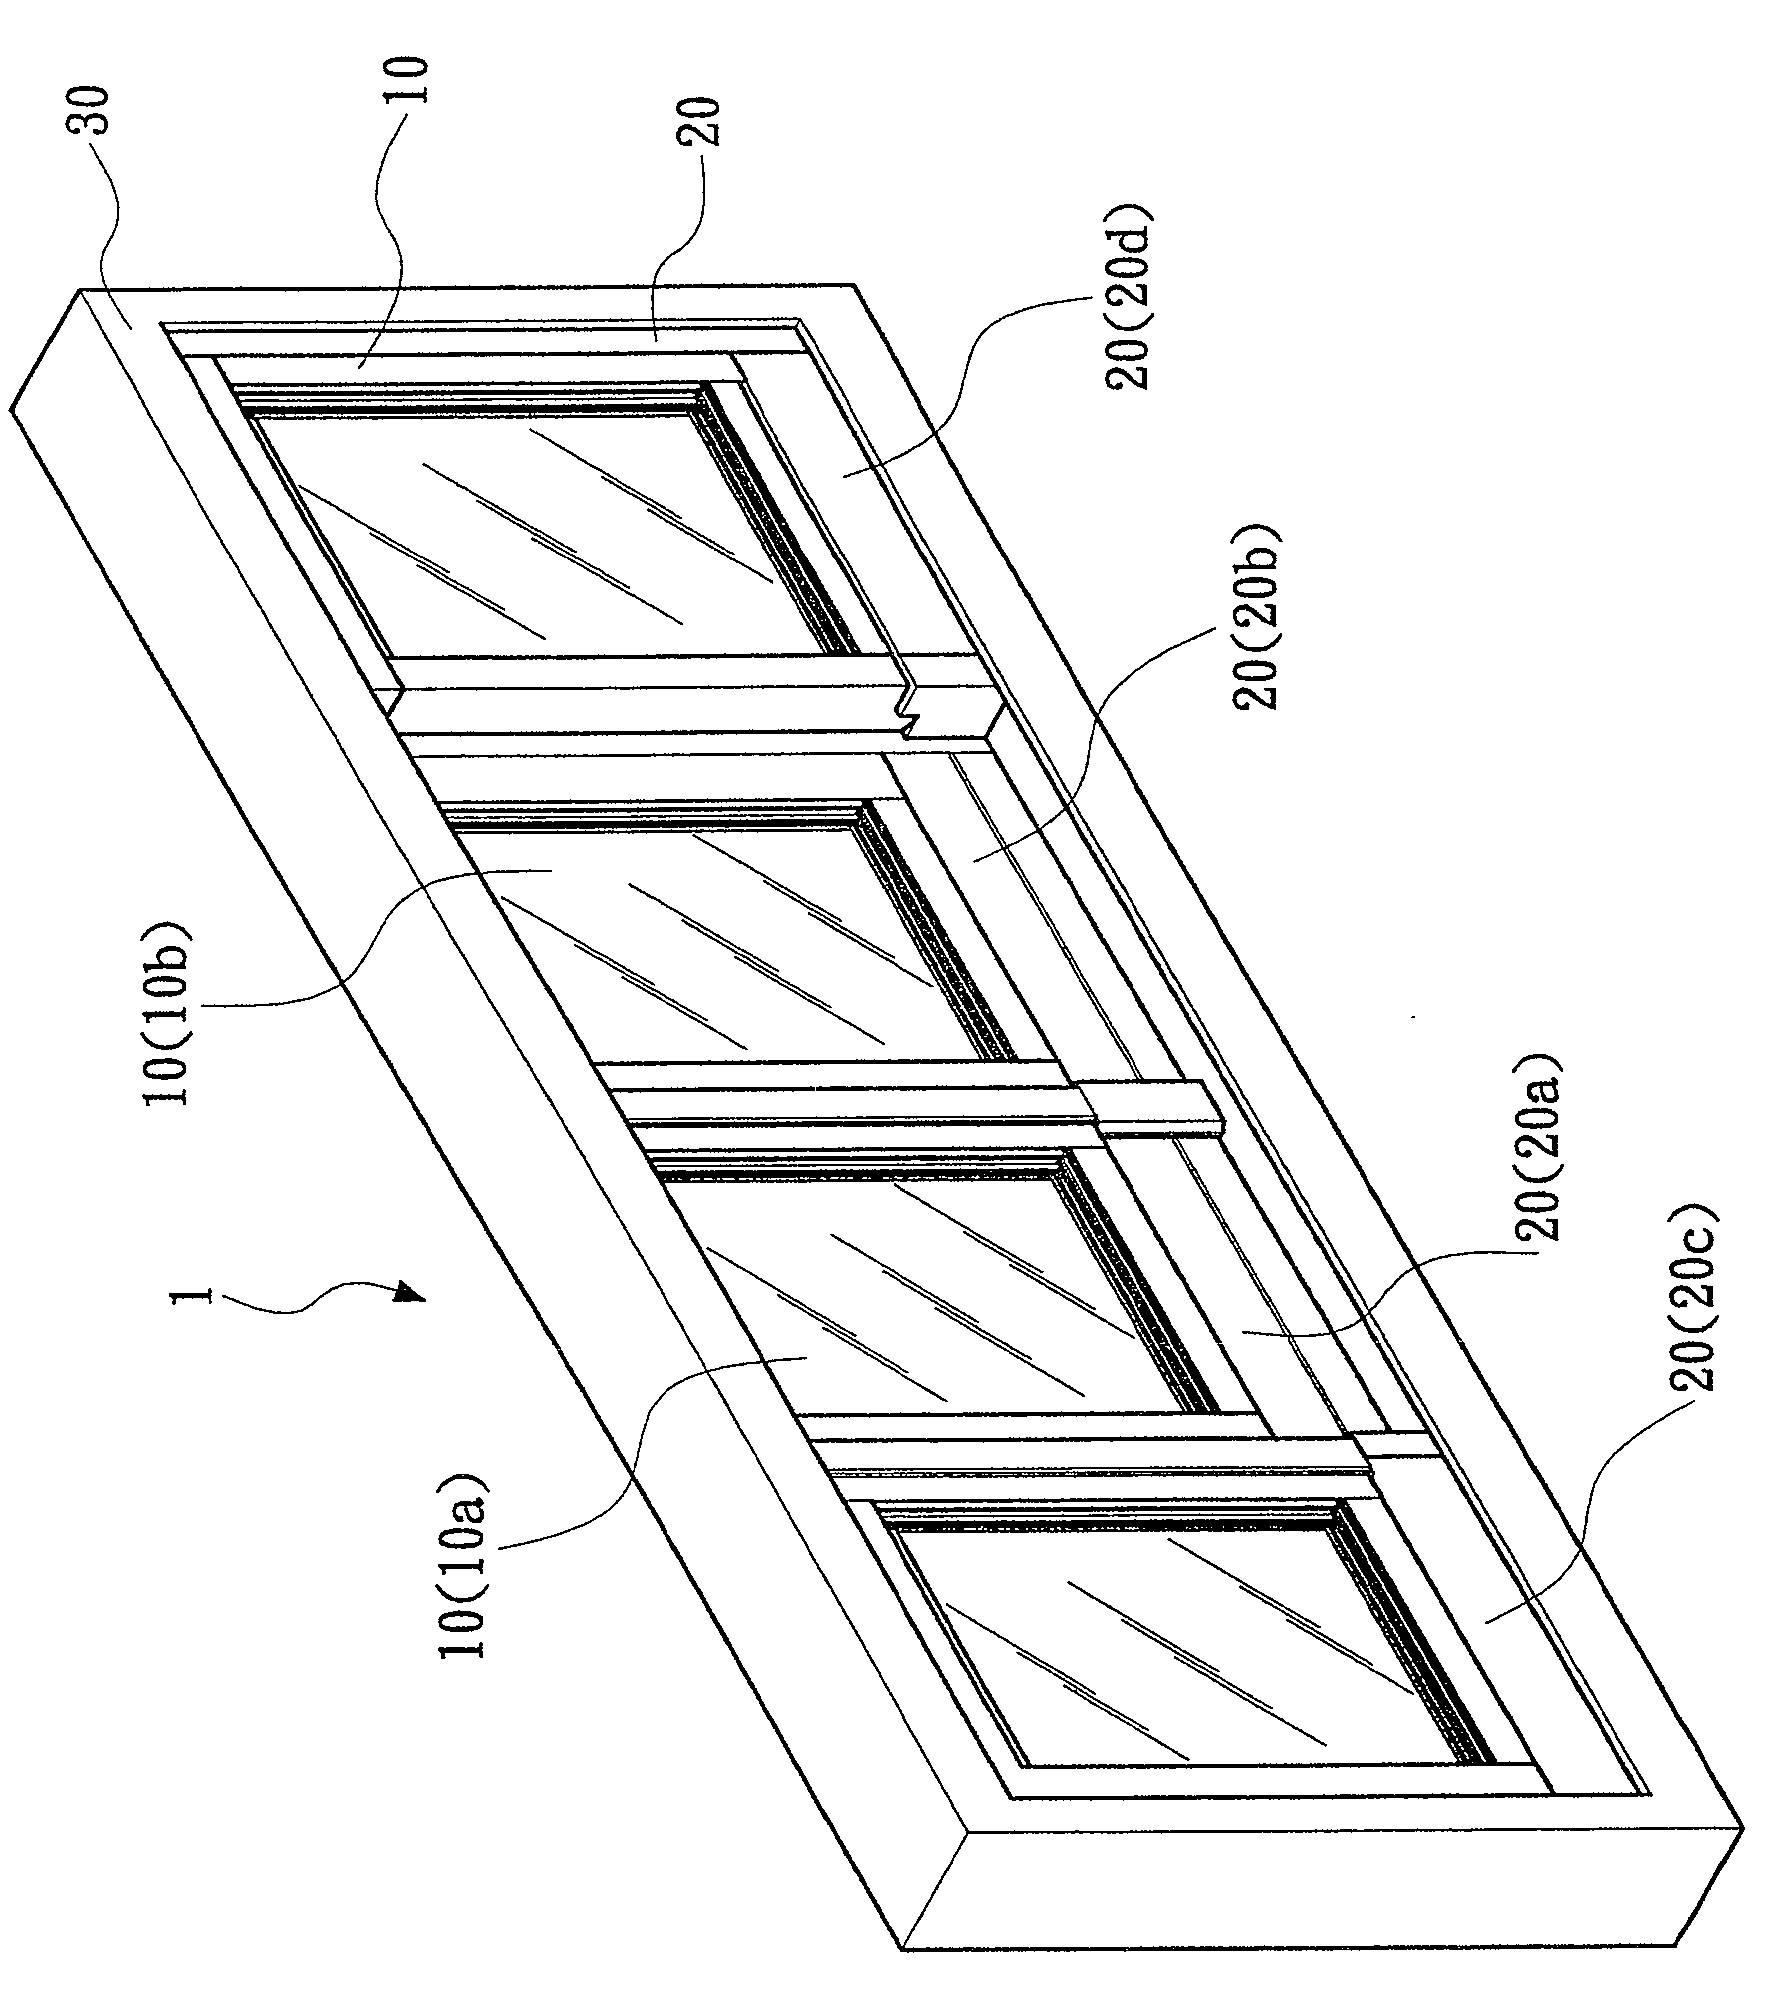 Slide opening and hinge opening two-purpose window structure